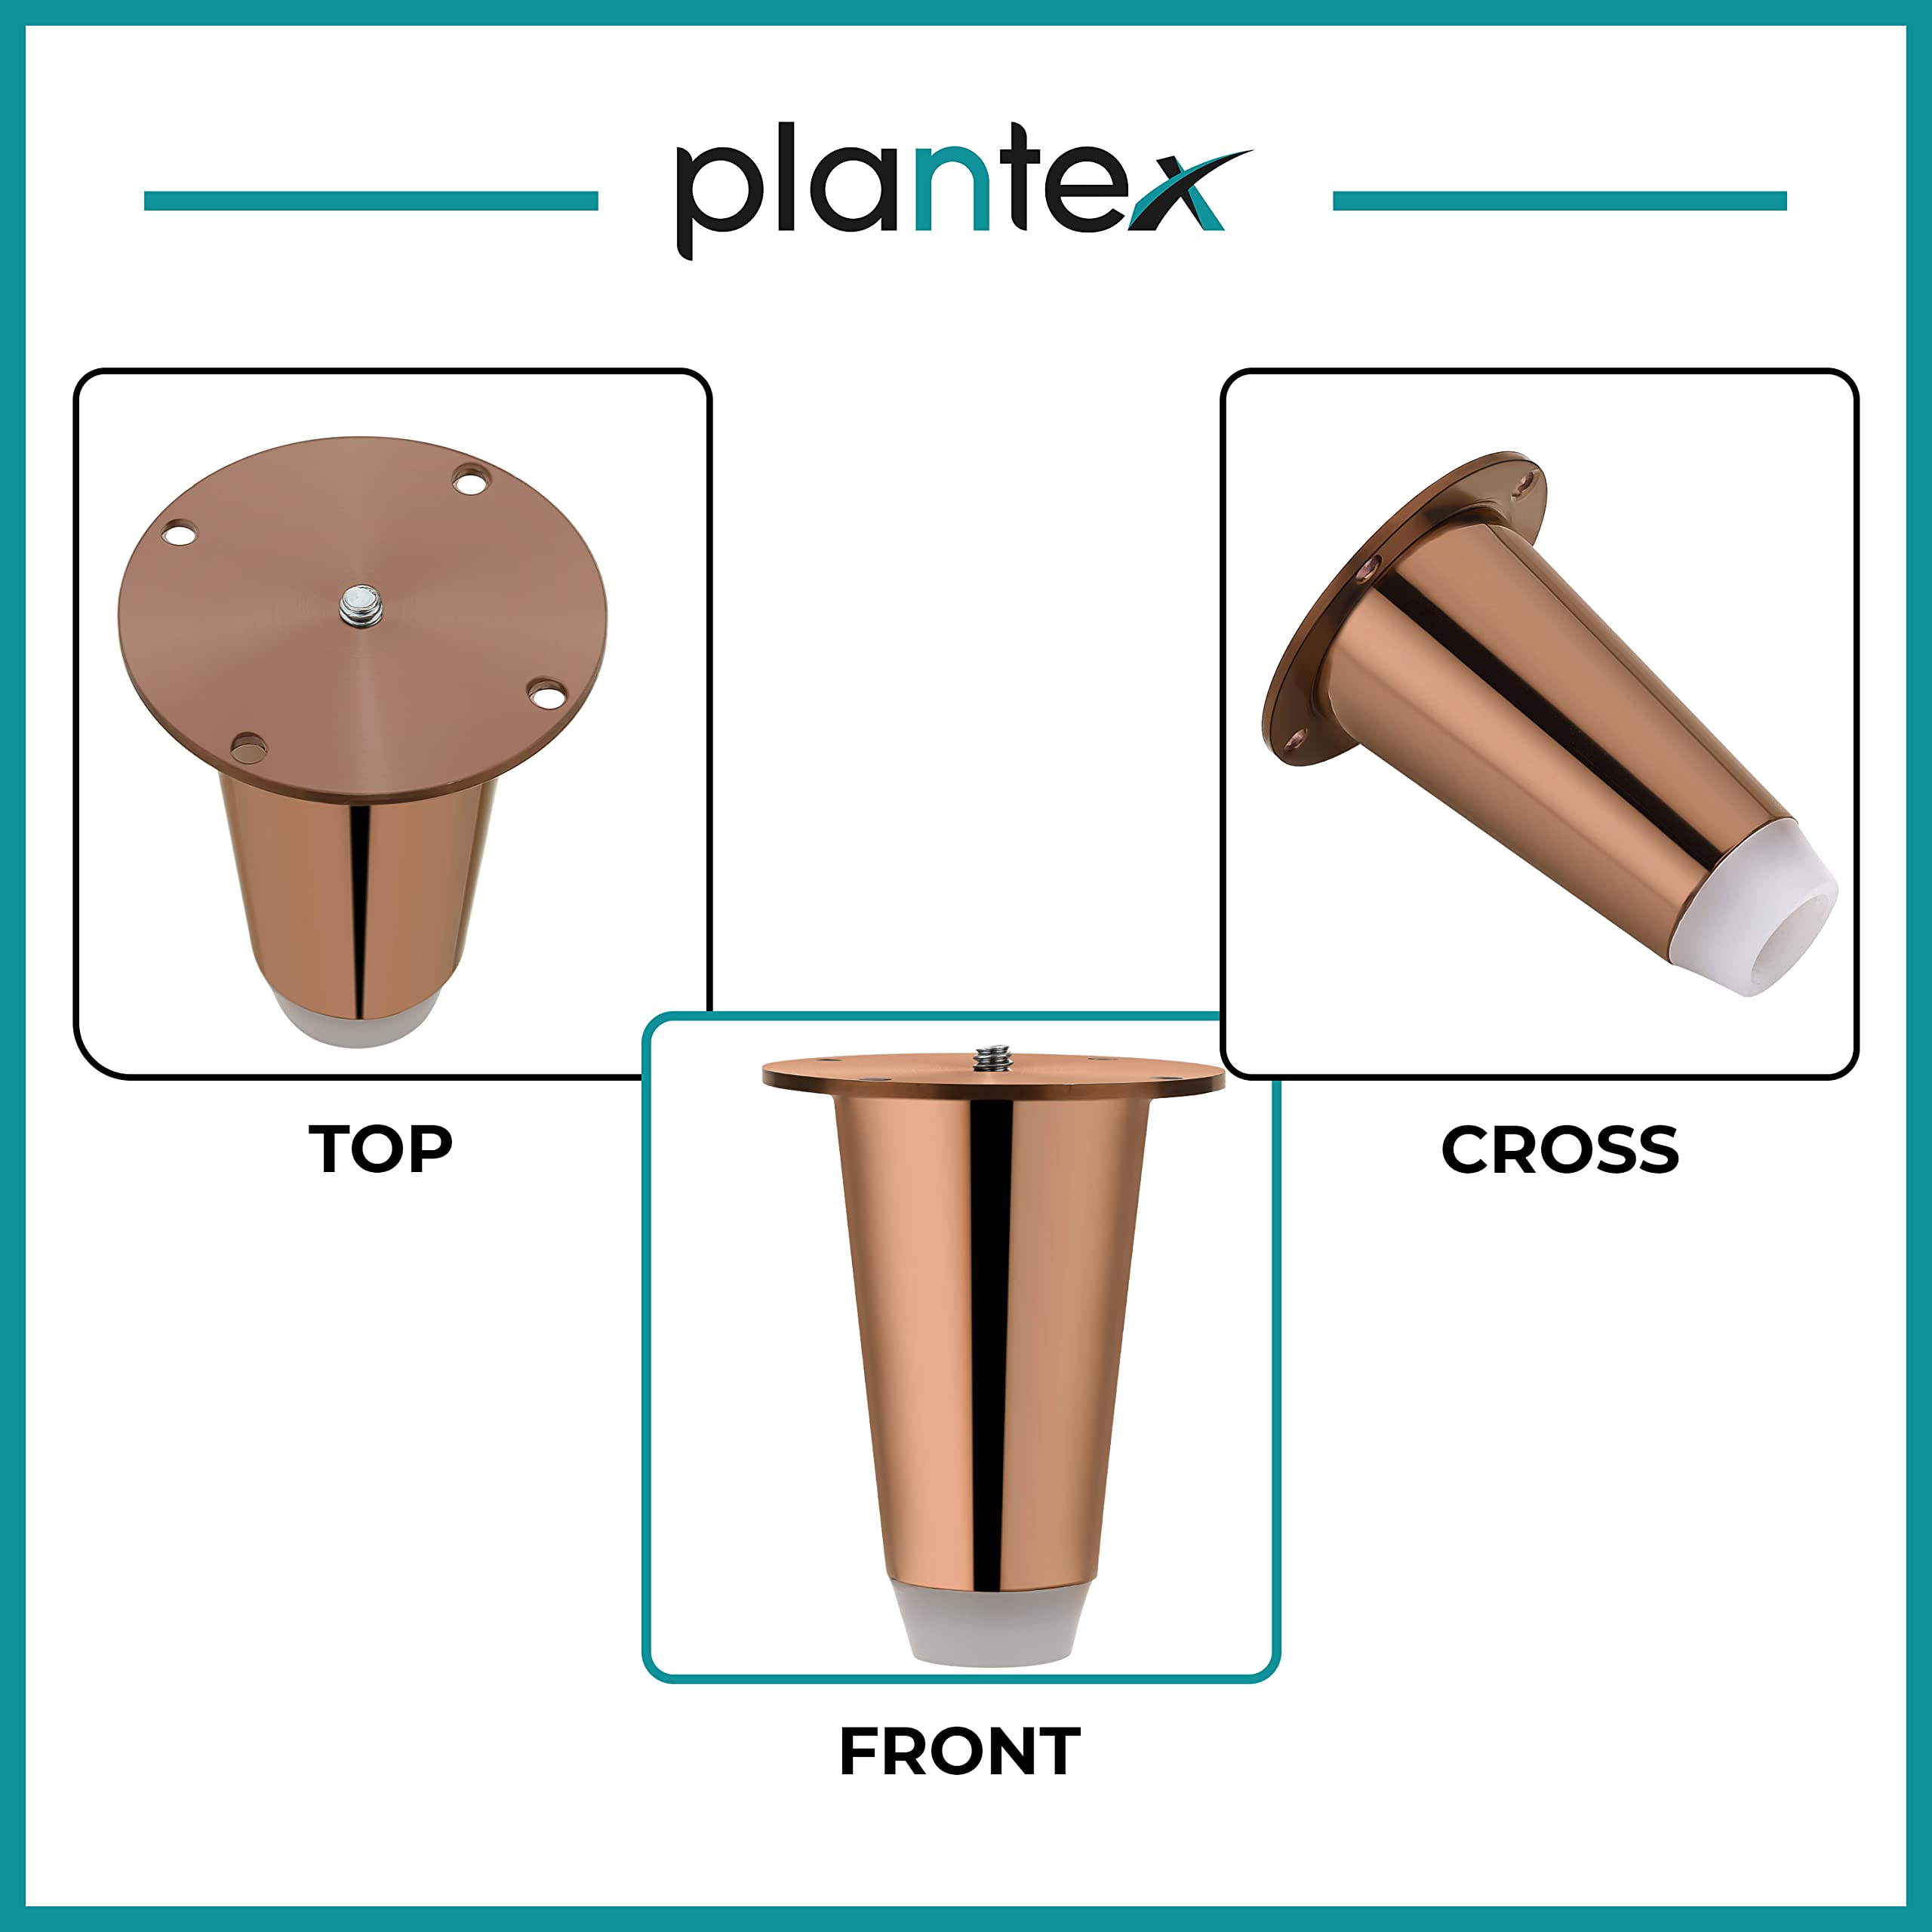 Plantex Heavy Duty Stainless Steel 4 inch Sofa Leg/Bed Furniture Leg Pair for Home Furnitures (DTS-53, Rose Gold) – 4 Pcs